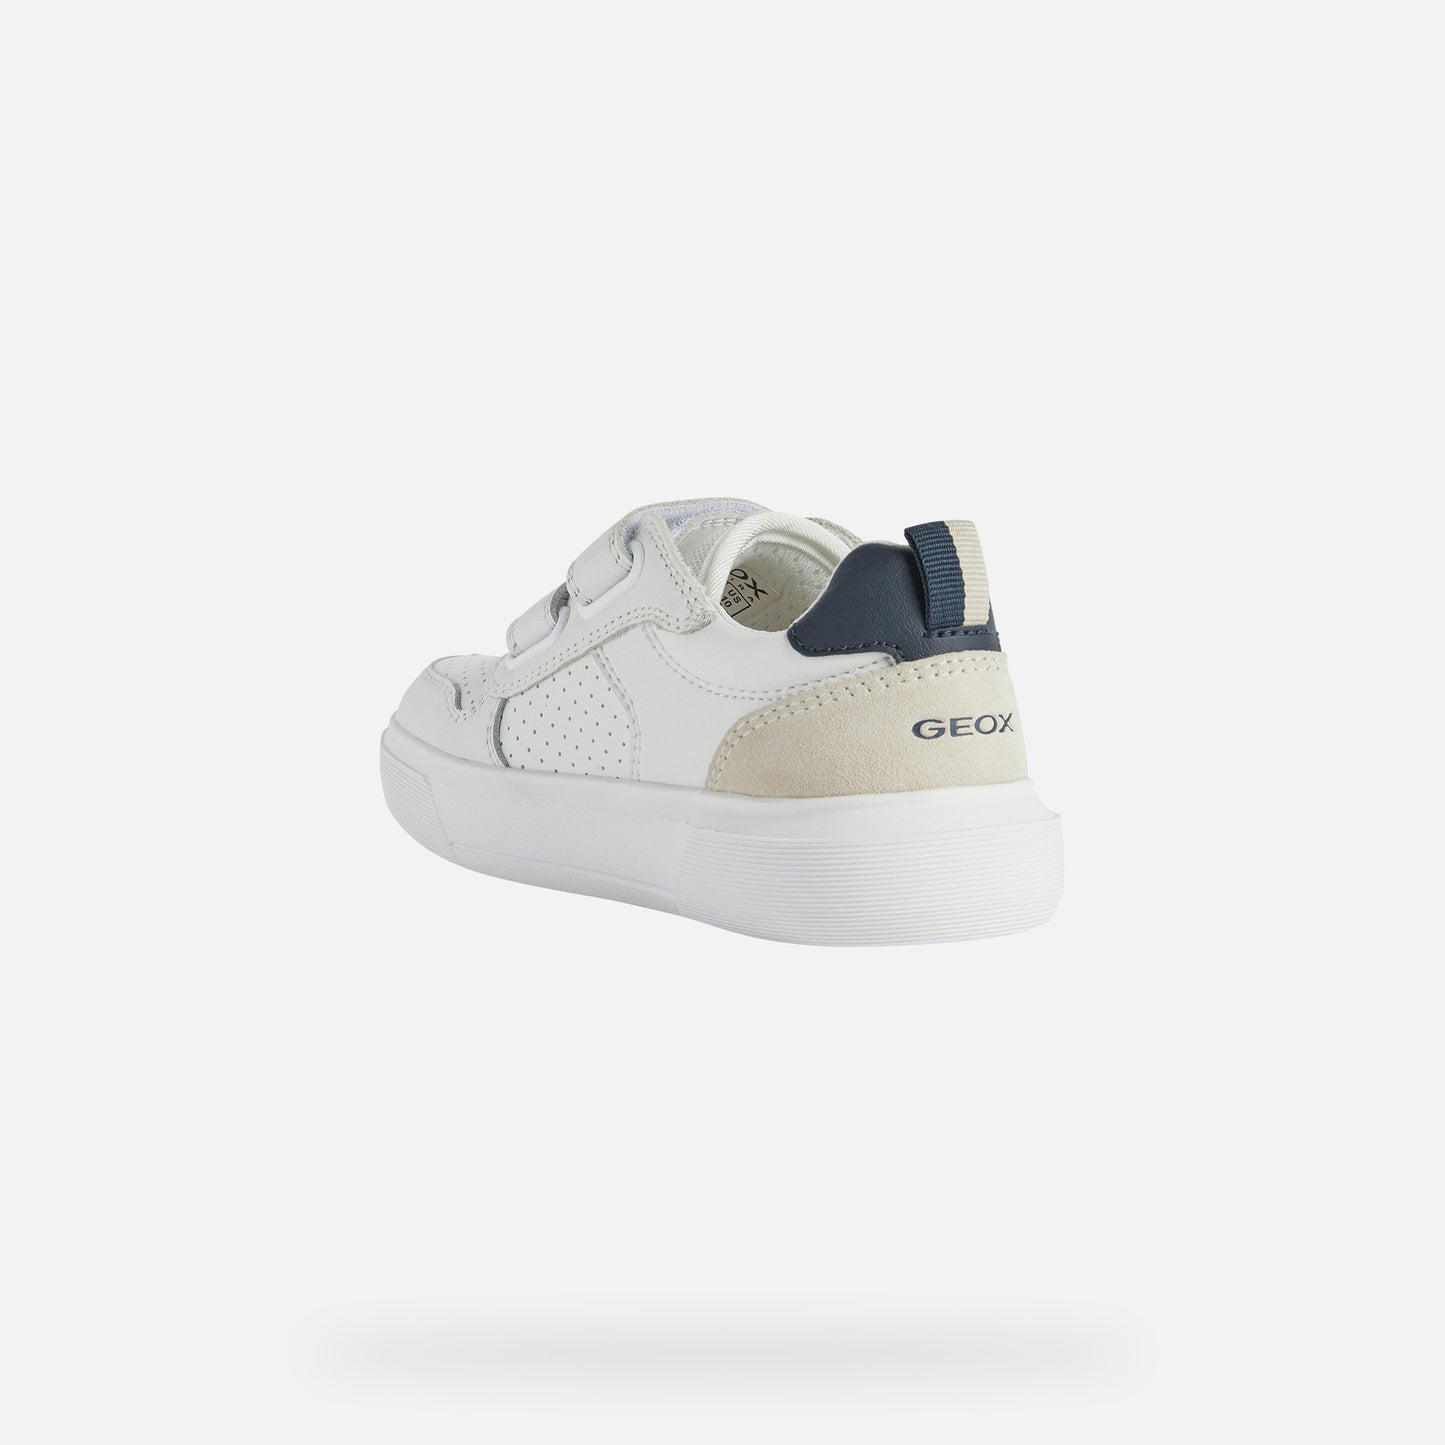 A casual boys trainer by Geox, style Nettuno, in white and navy with double velcro fastening. Back view.